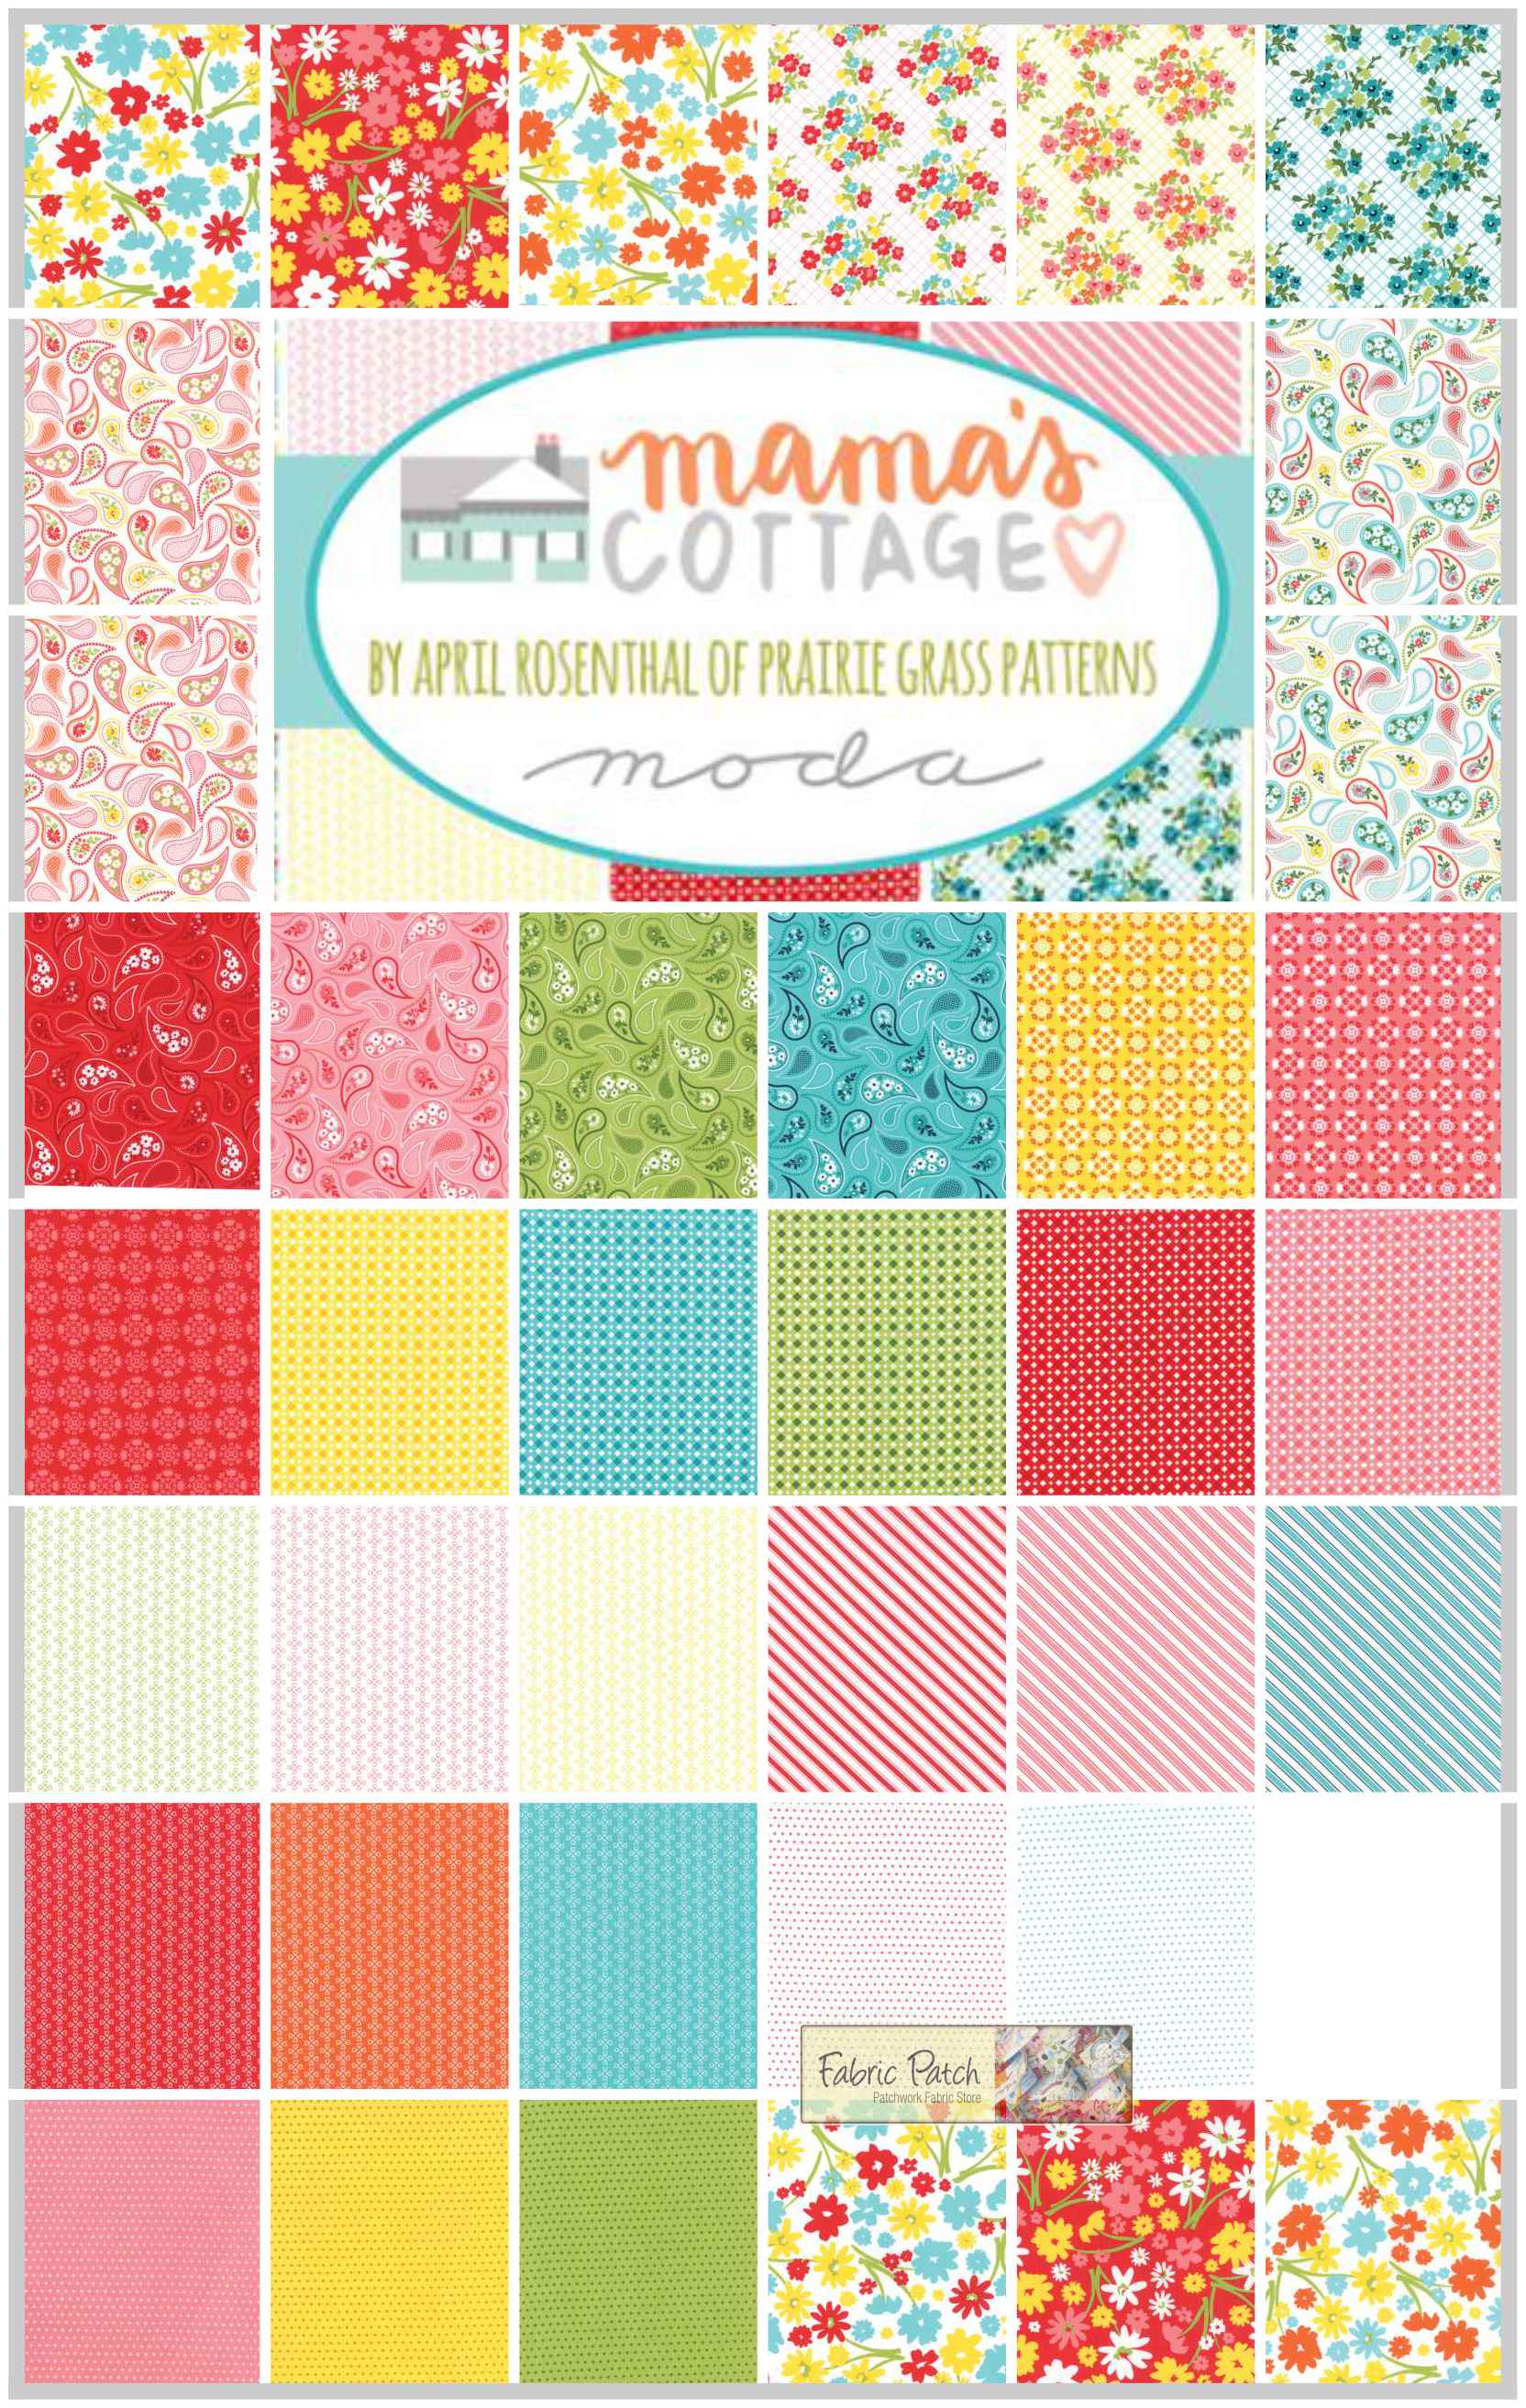 Mamas Cottage Fat Quarter Bundle by April Rosenthal of Prairie Grass Patterns for Moda Fabrics.   Applique, patchwork and quilting fabrics.